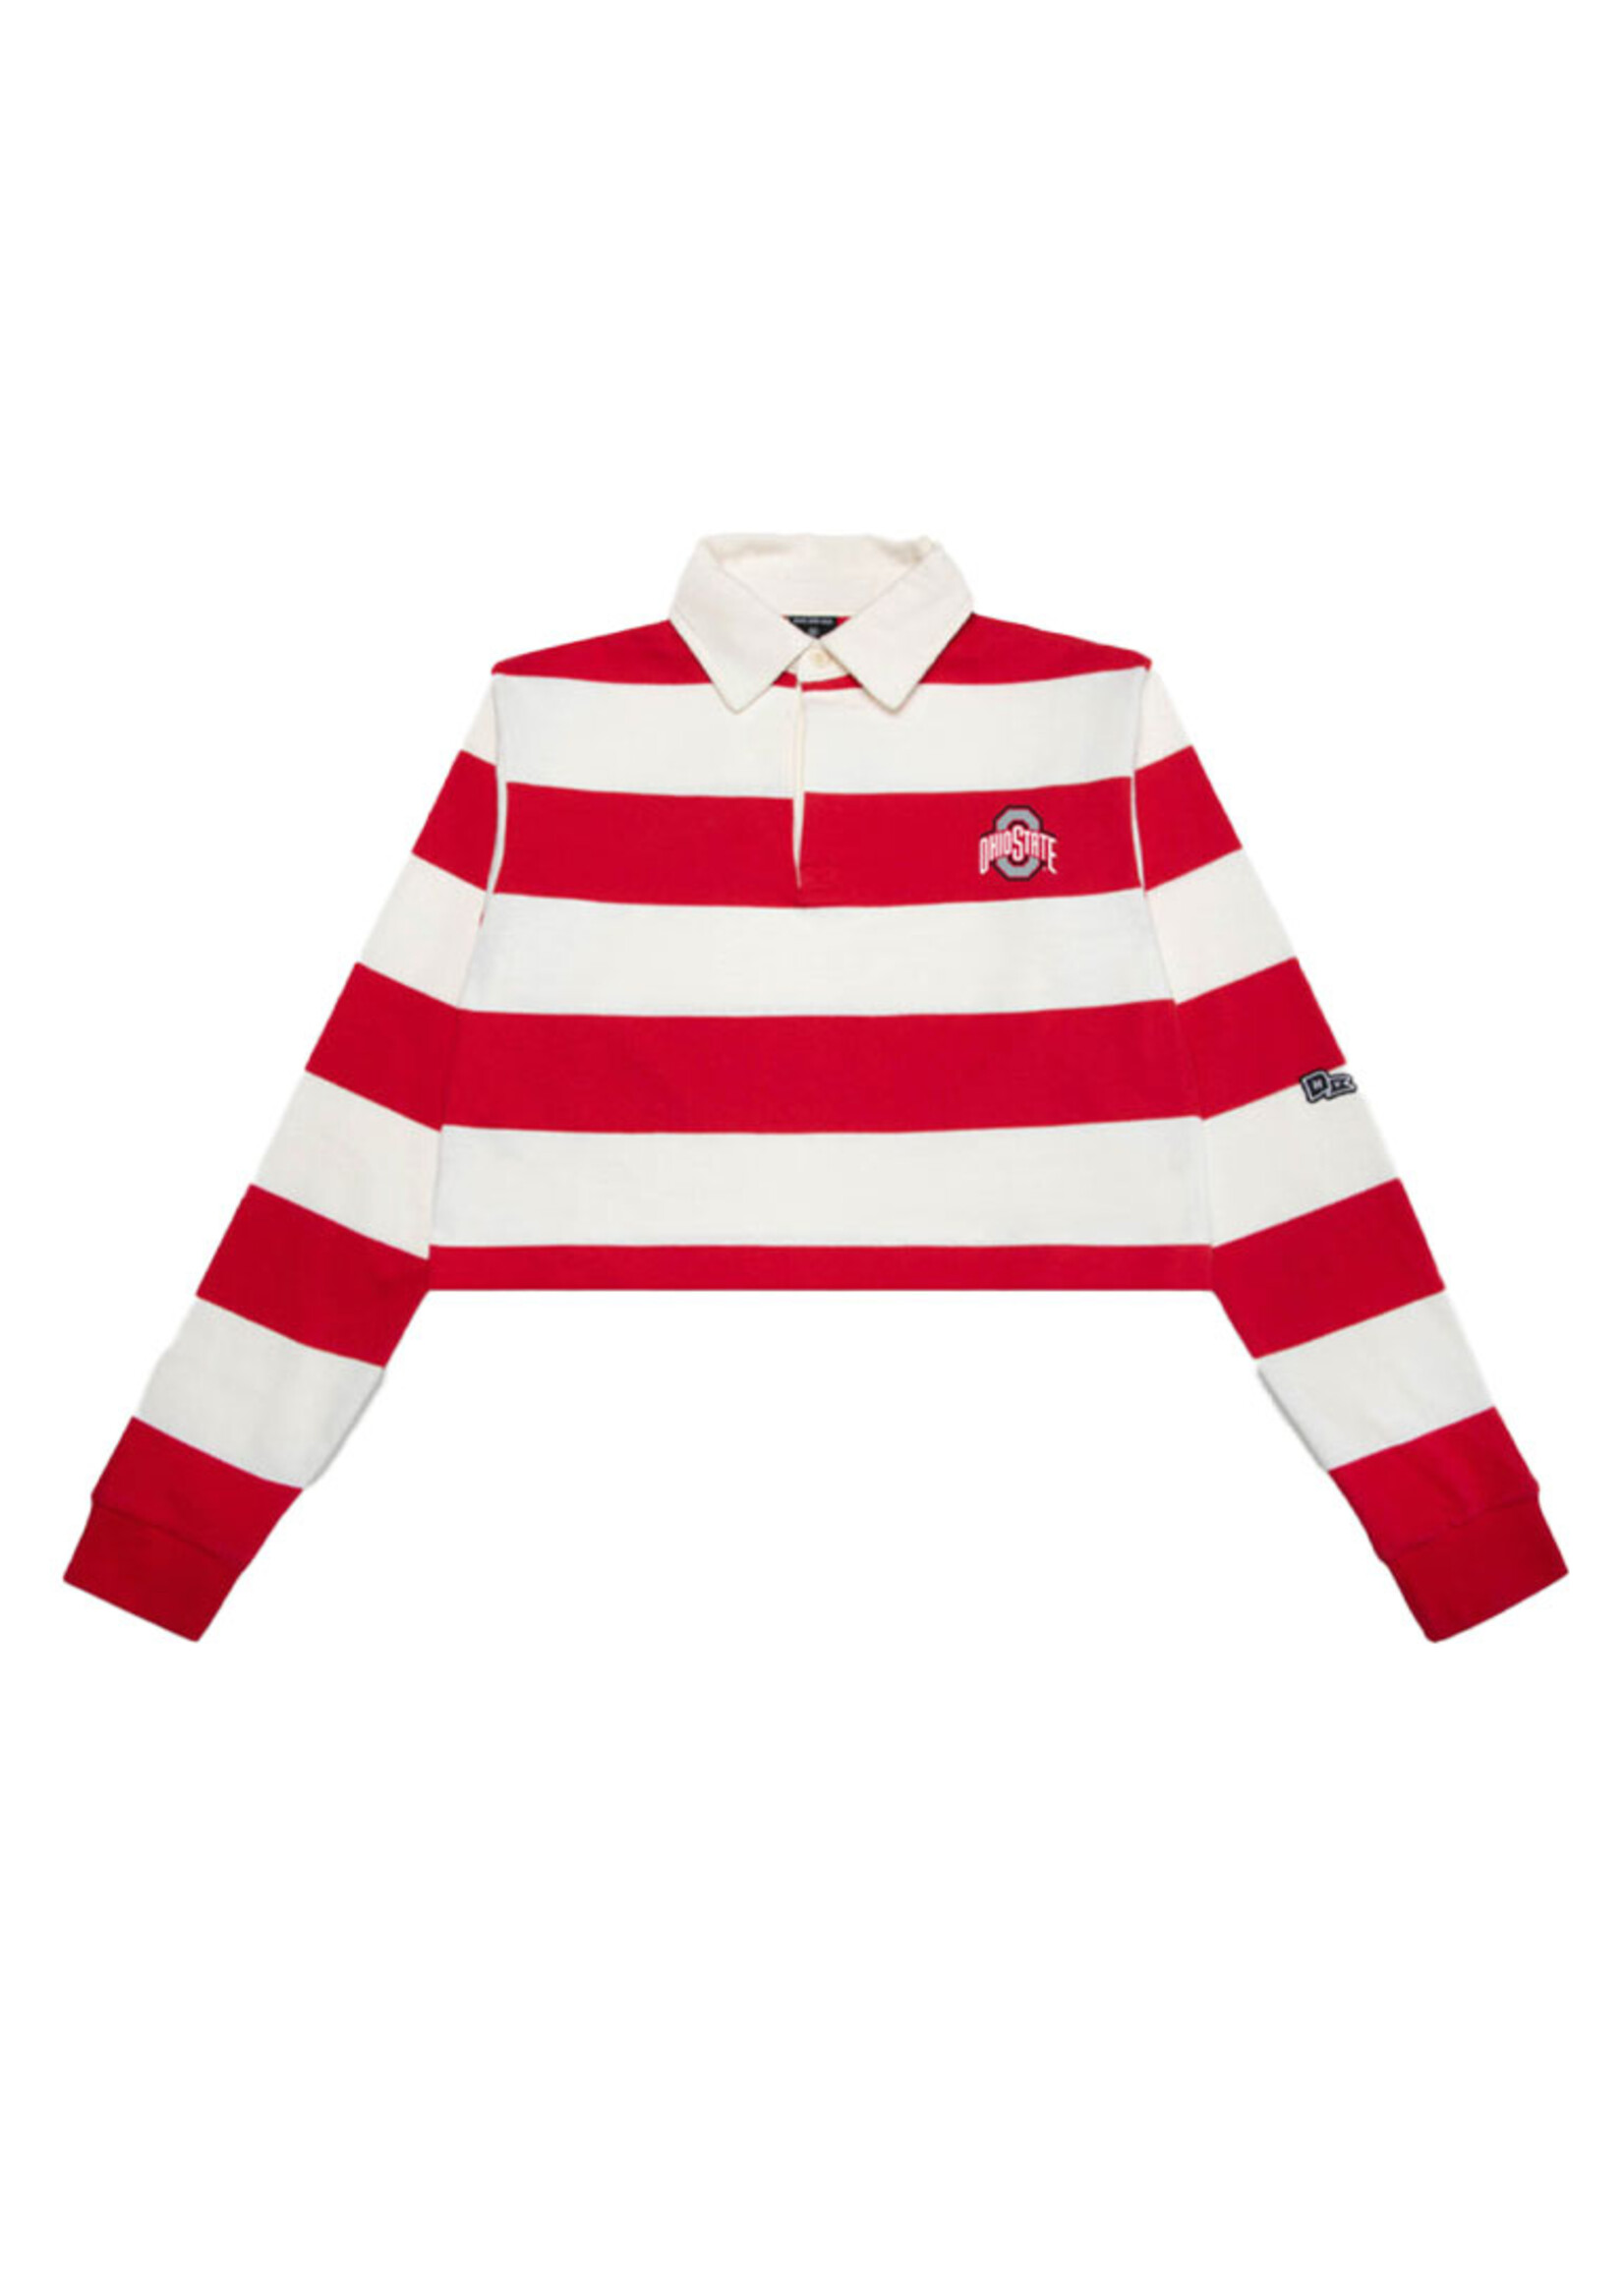 Ohio State Buckeyes Women's Rugby Polo